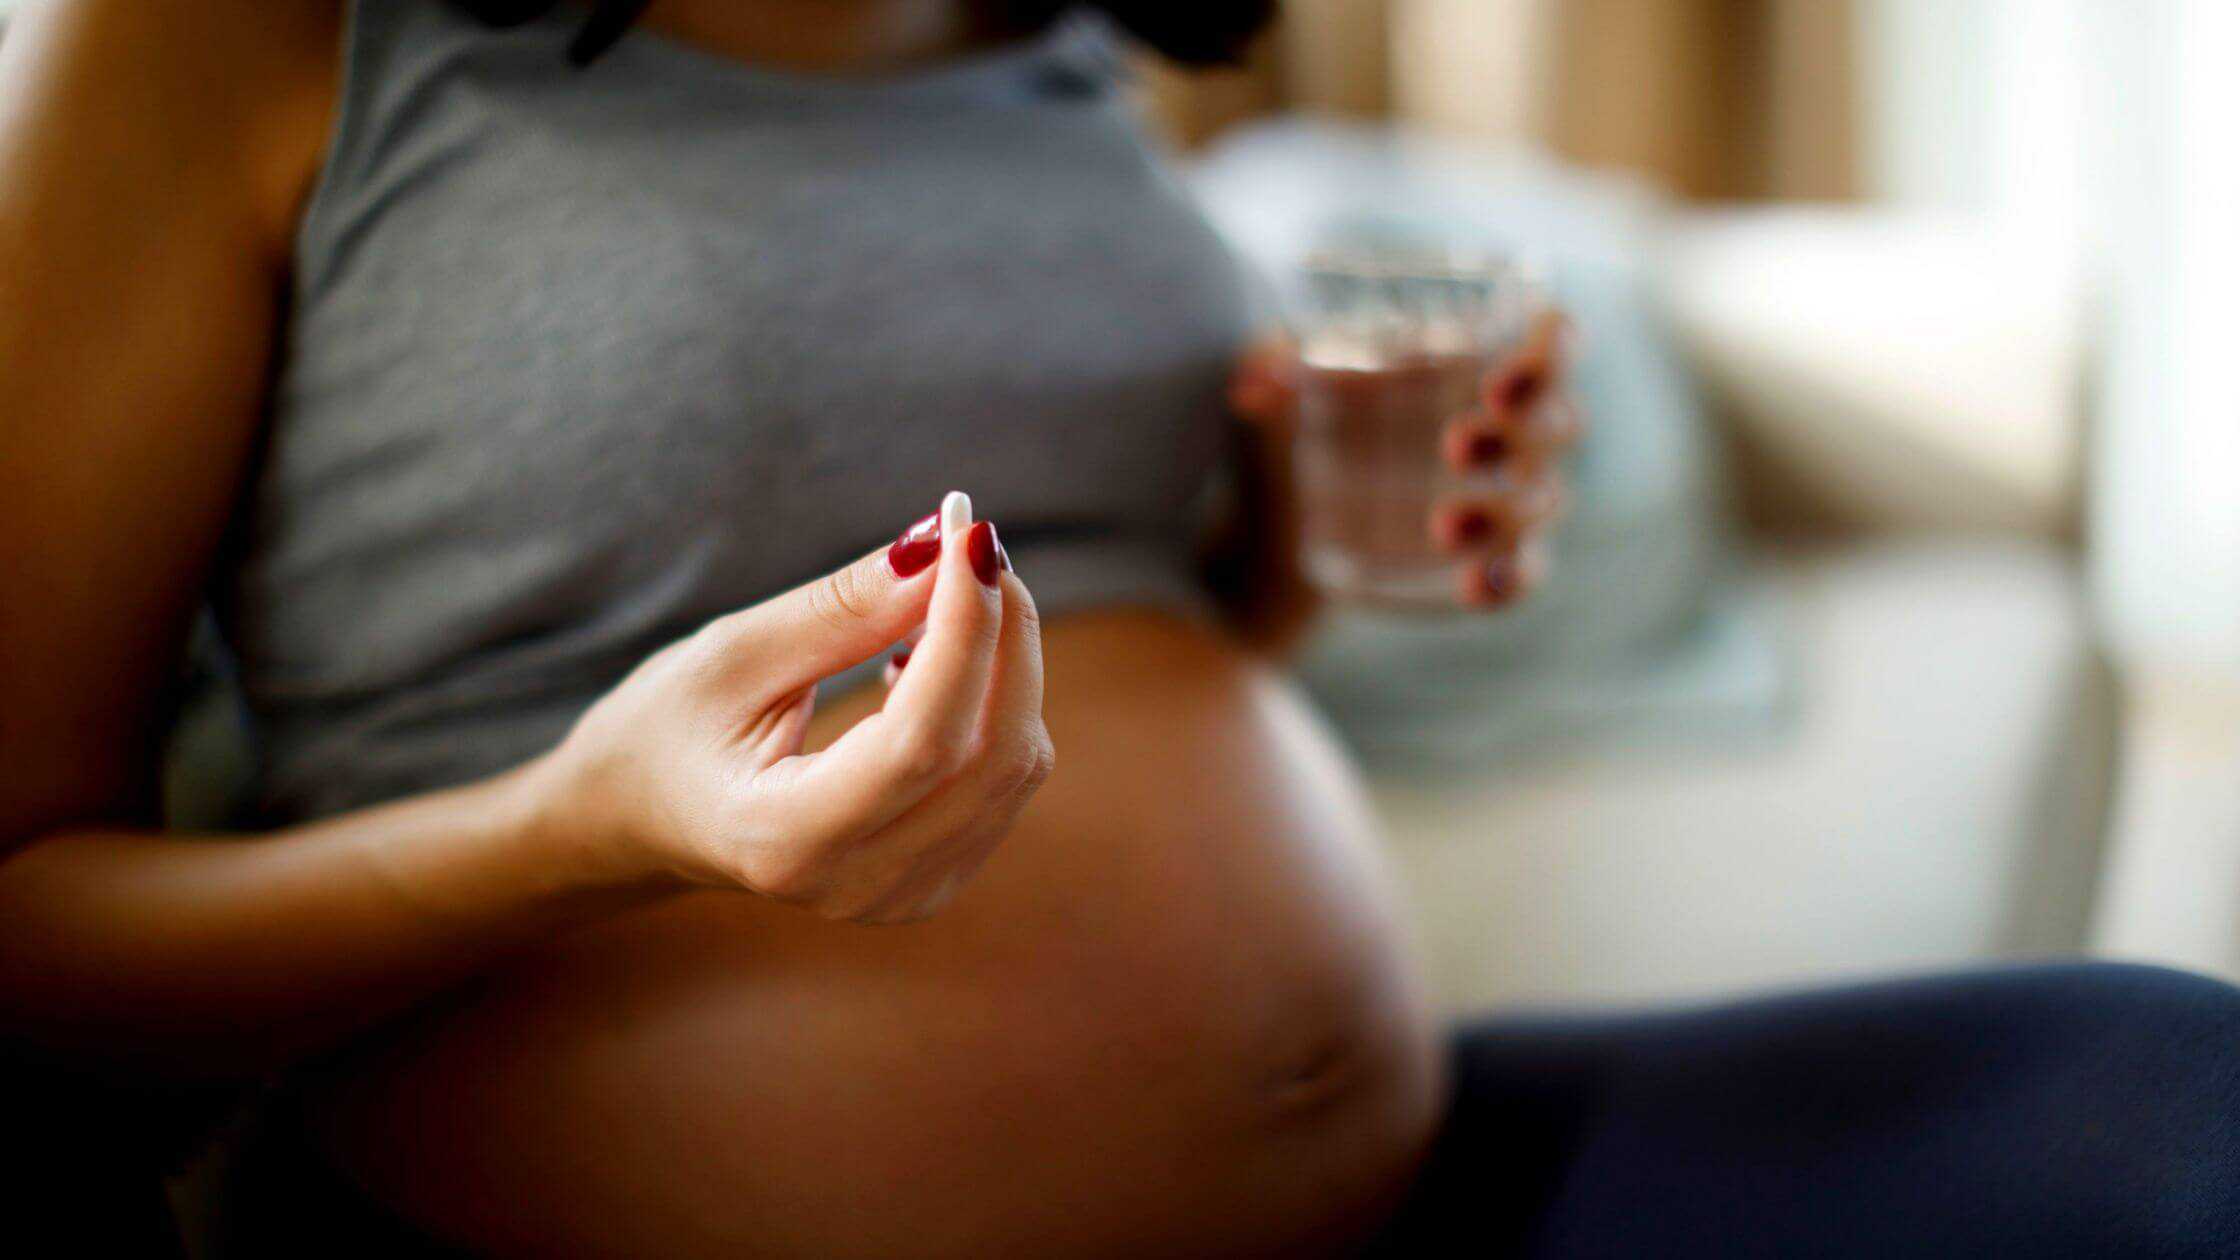 Using Anti-Depressants During Pregnancy- What Expert Says